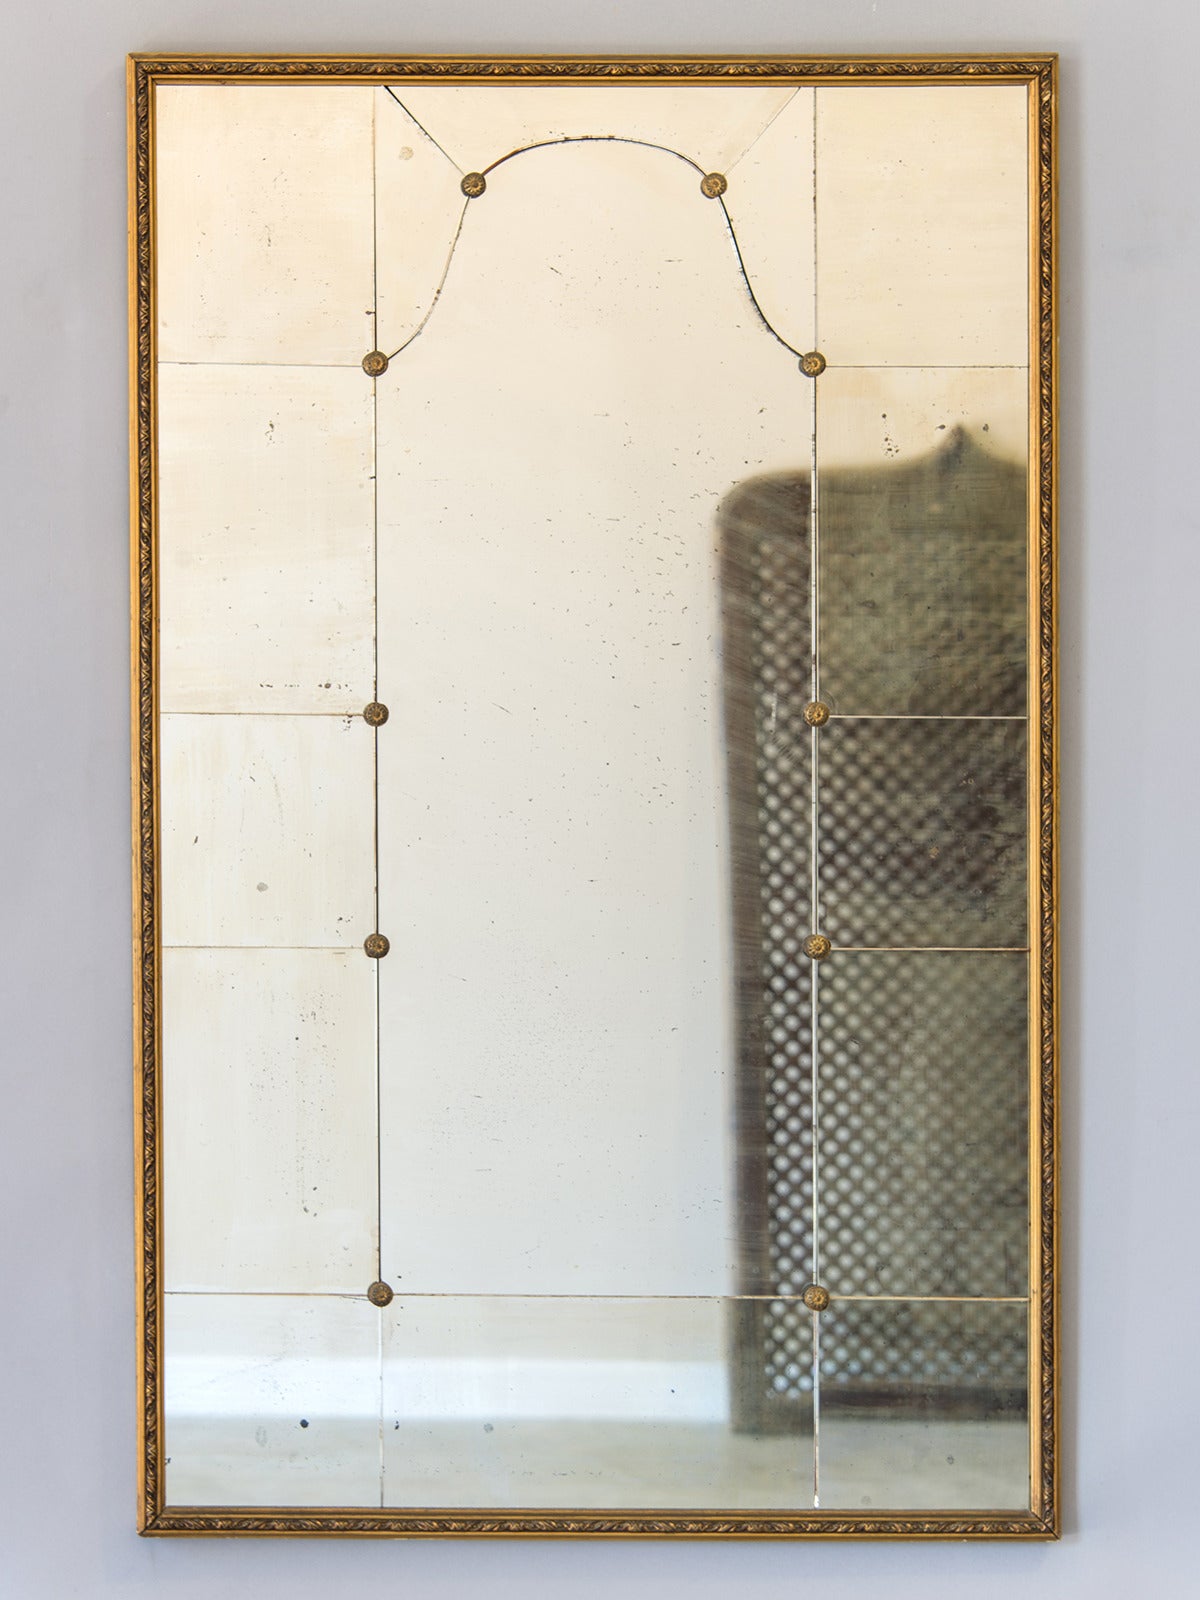 Vintage Mid Century Gilt Framed Mirror, France c.1950. The lovely arch seen within the mirror glass on this piece results from the individual plates of mirror cut and shaped to create a unique pattern. Between each mirror plate is a circular